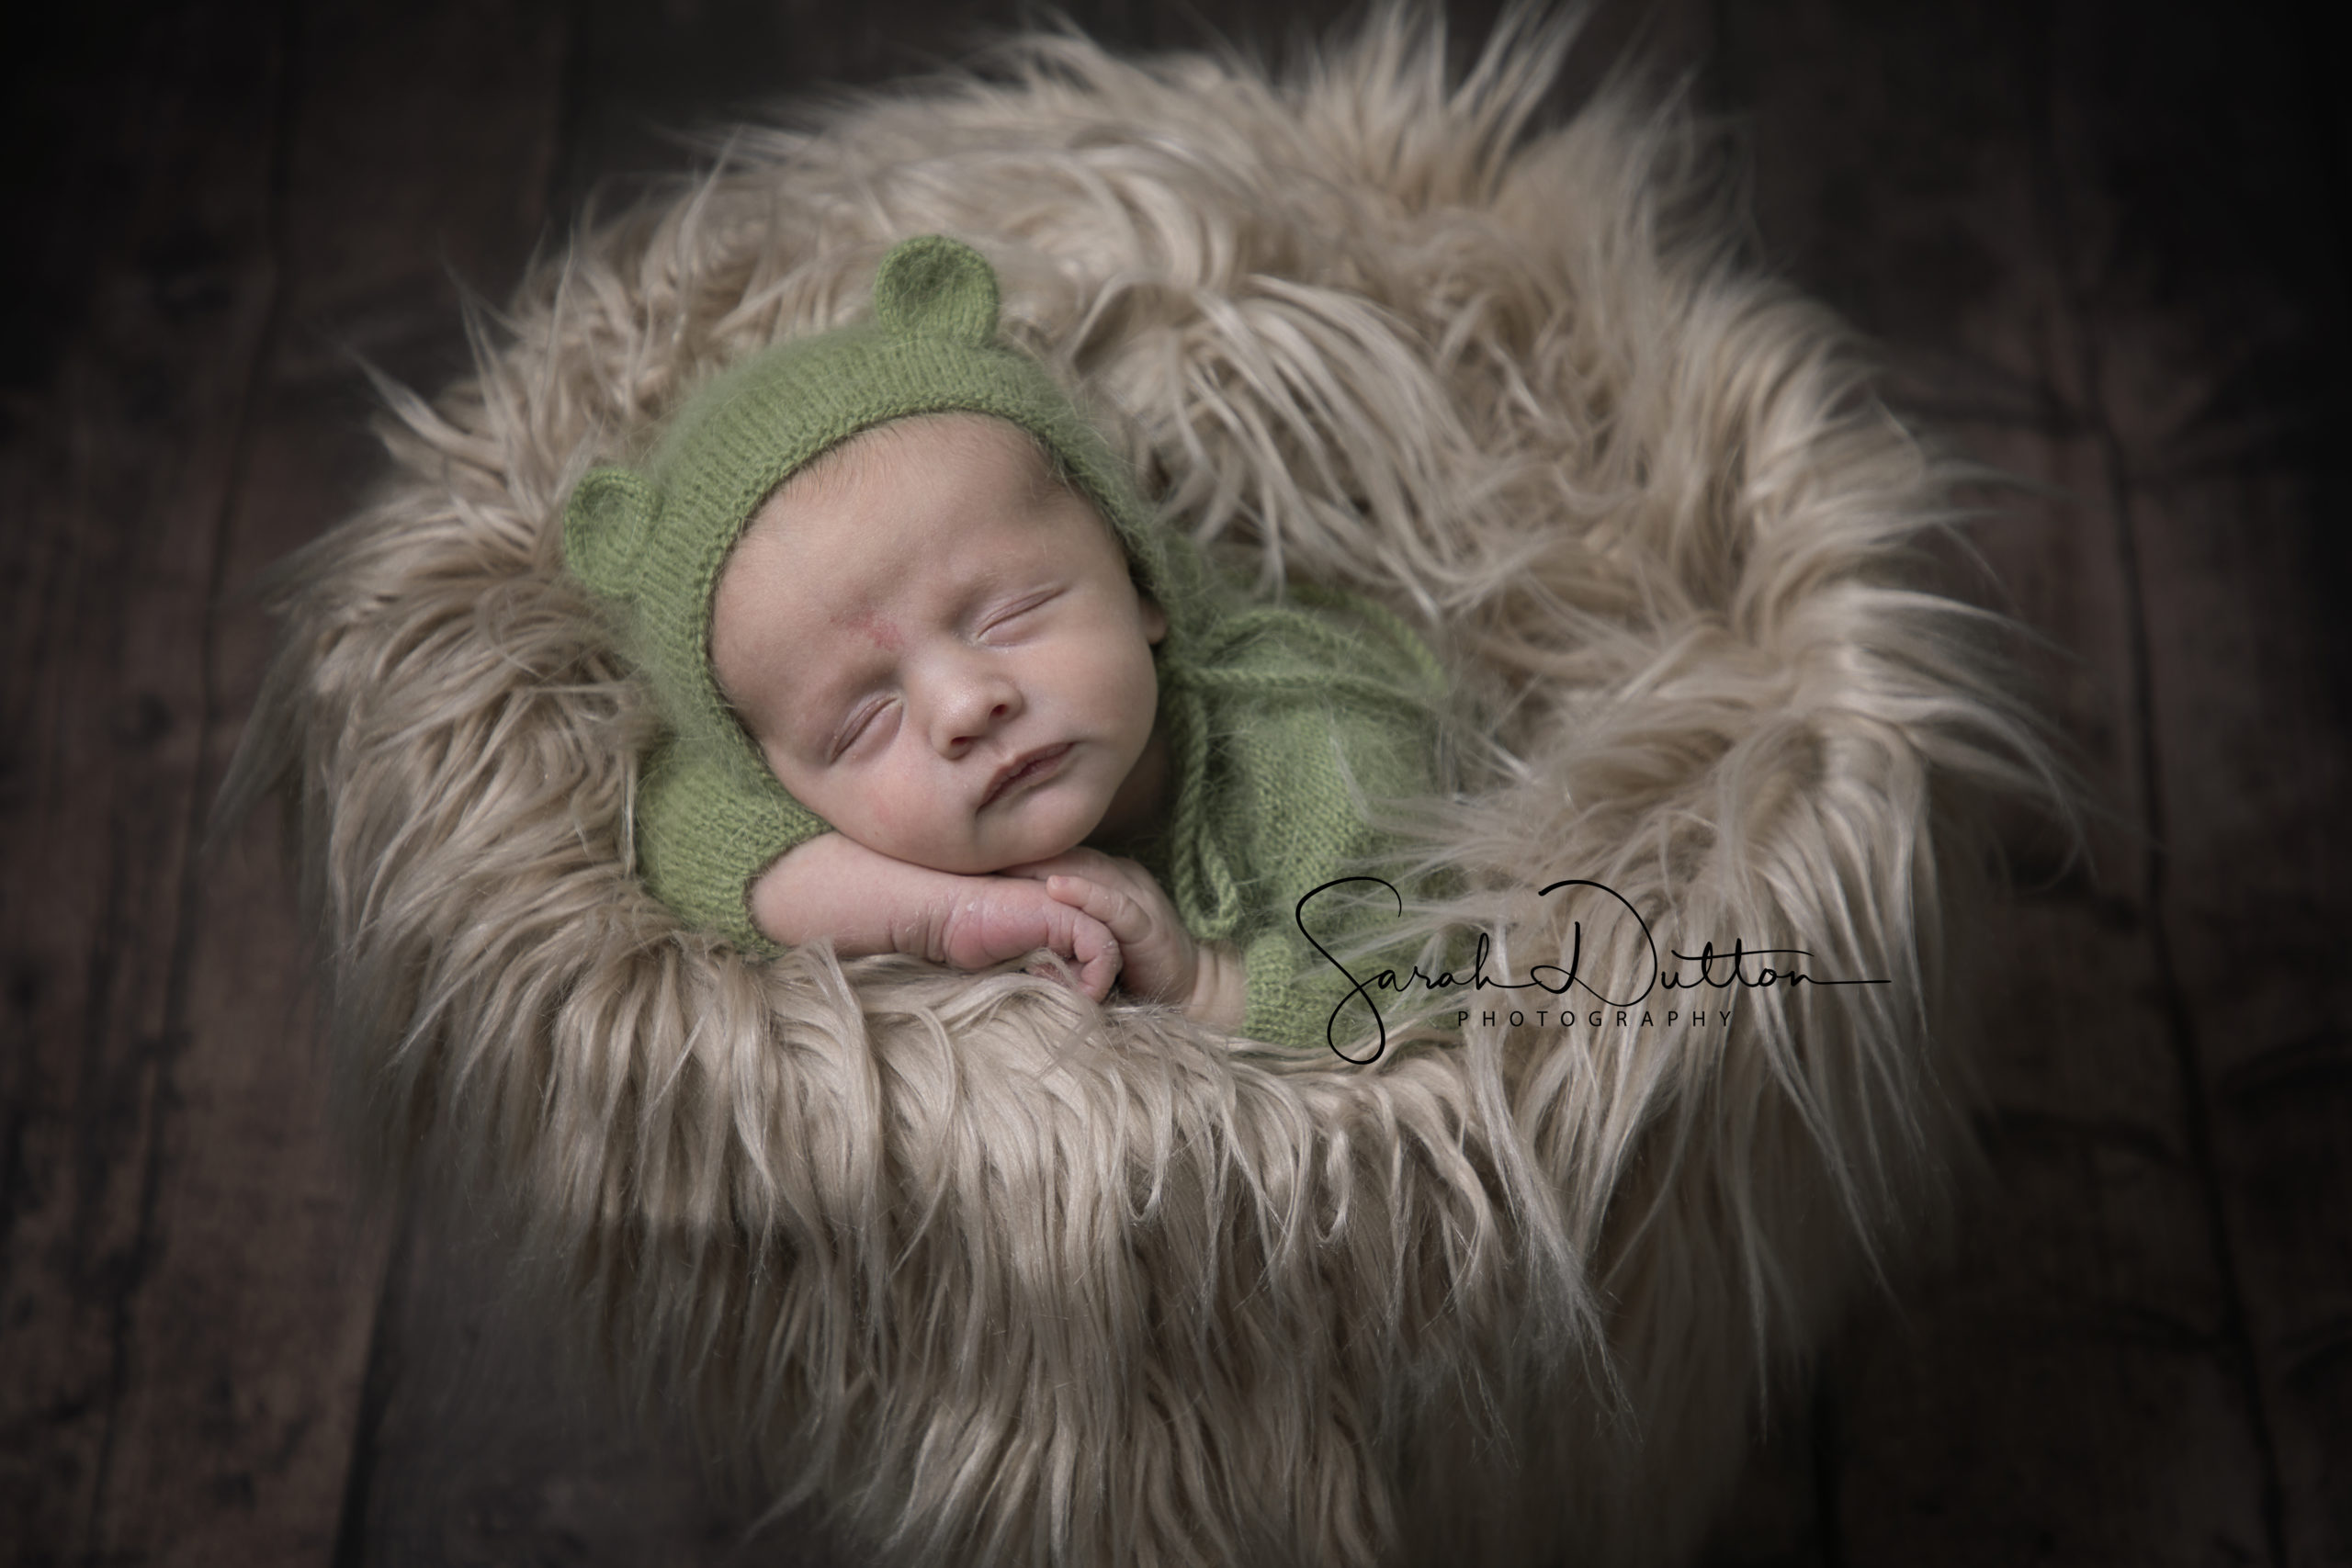 Newborn baby photographer image of a newborn baby taken in a studio in Whitchurch Hampshire by a professional photographer